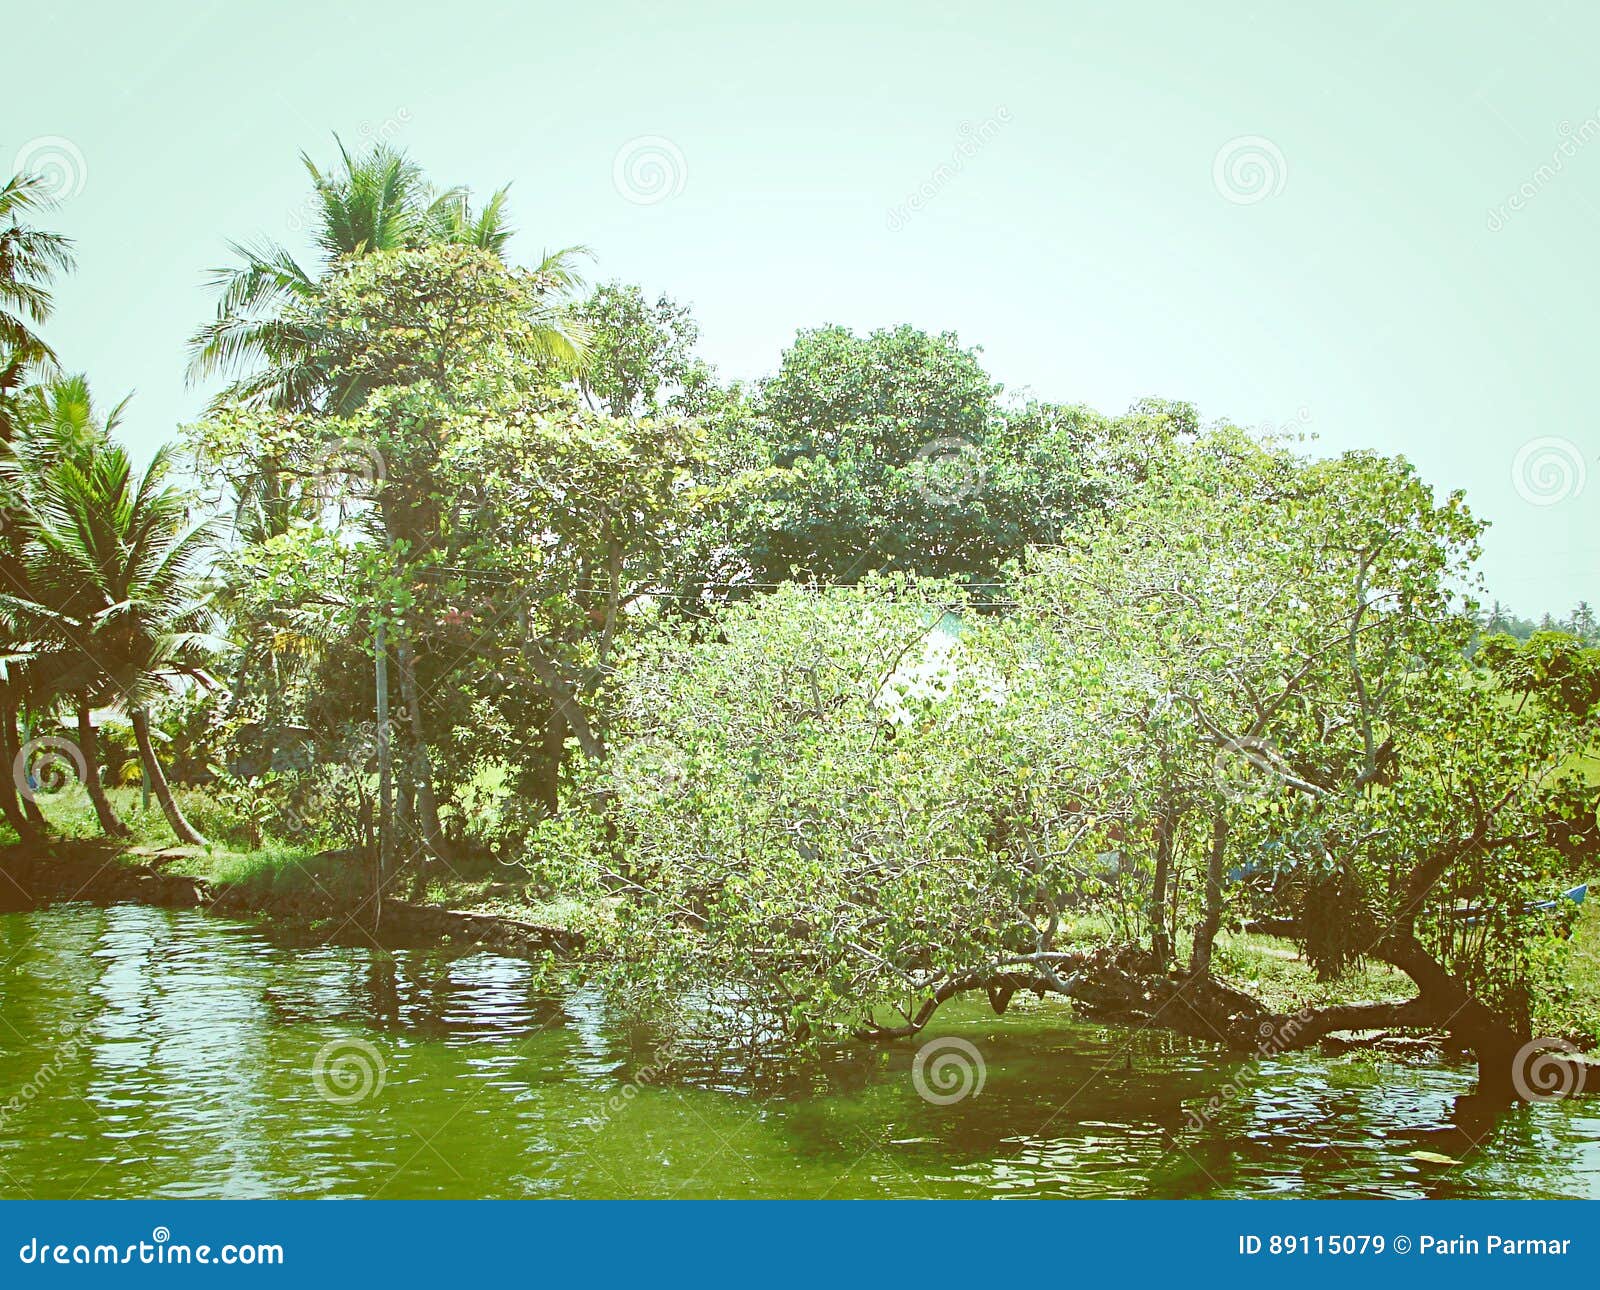 Greenery - Trees at Shore of Backwaters Stock Image - Image of flora ...